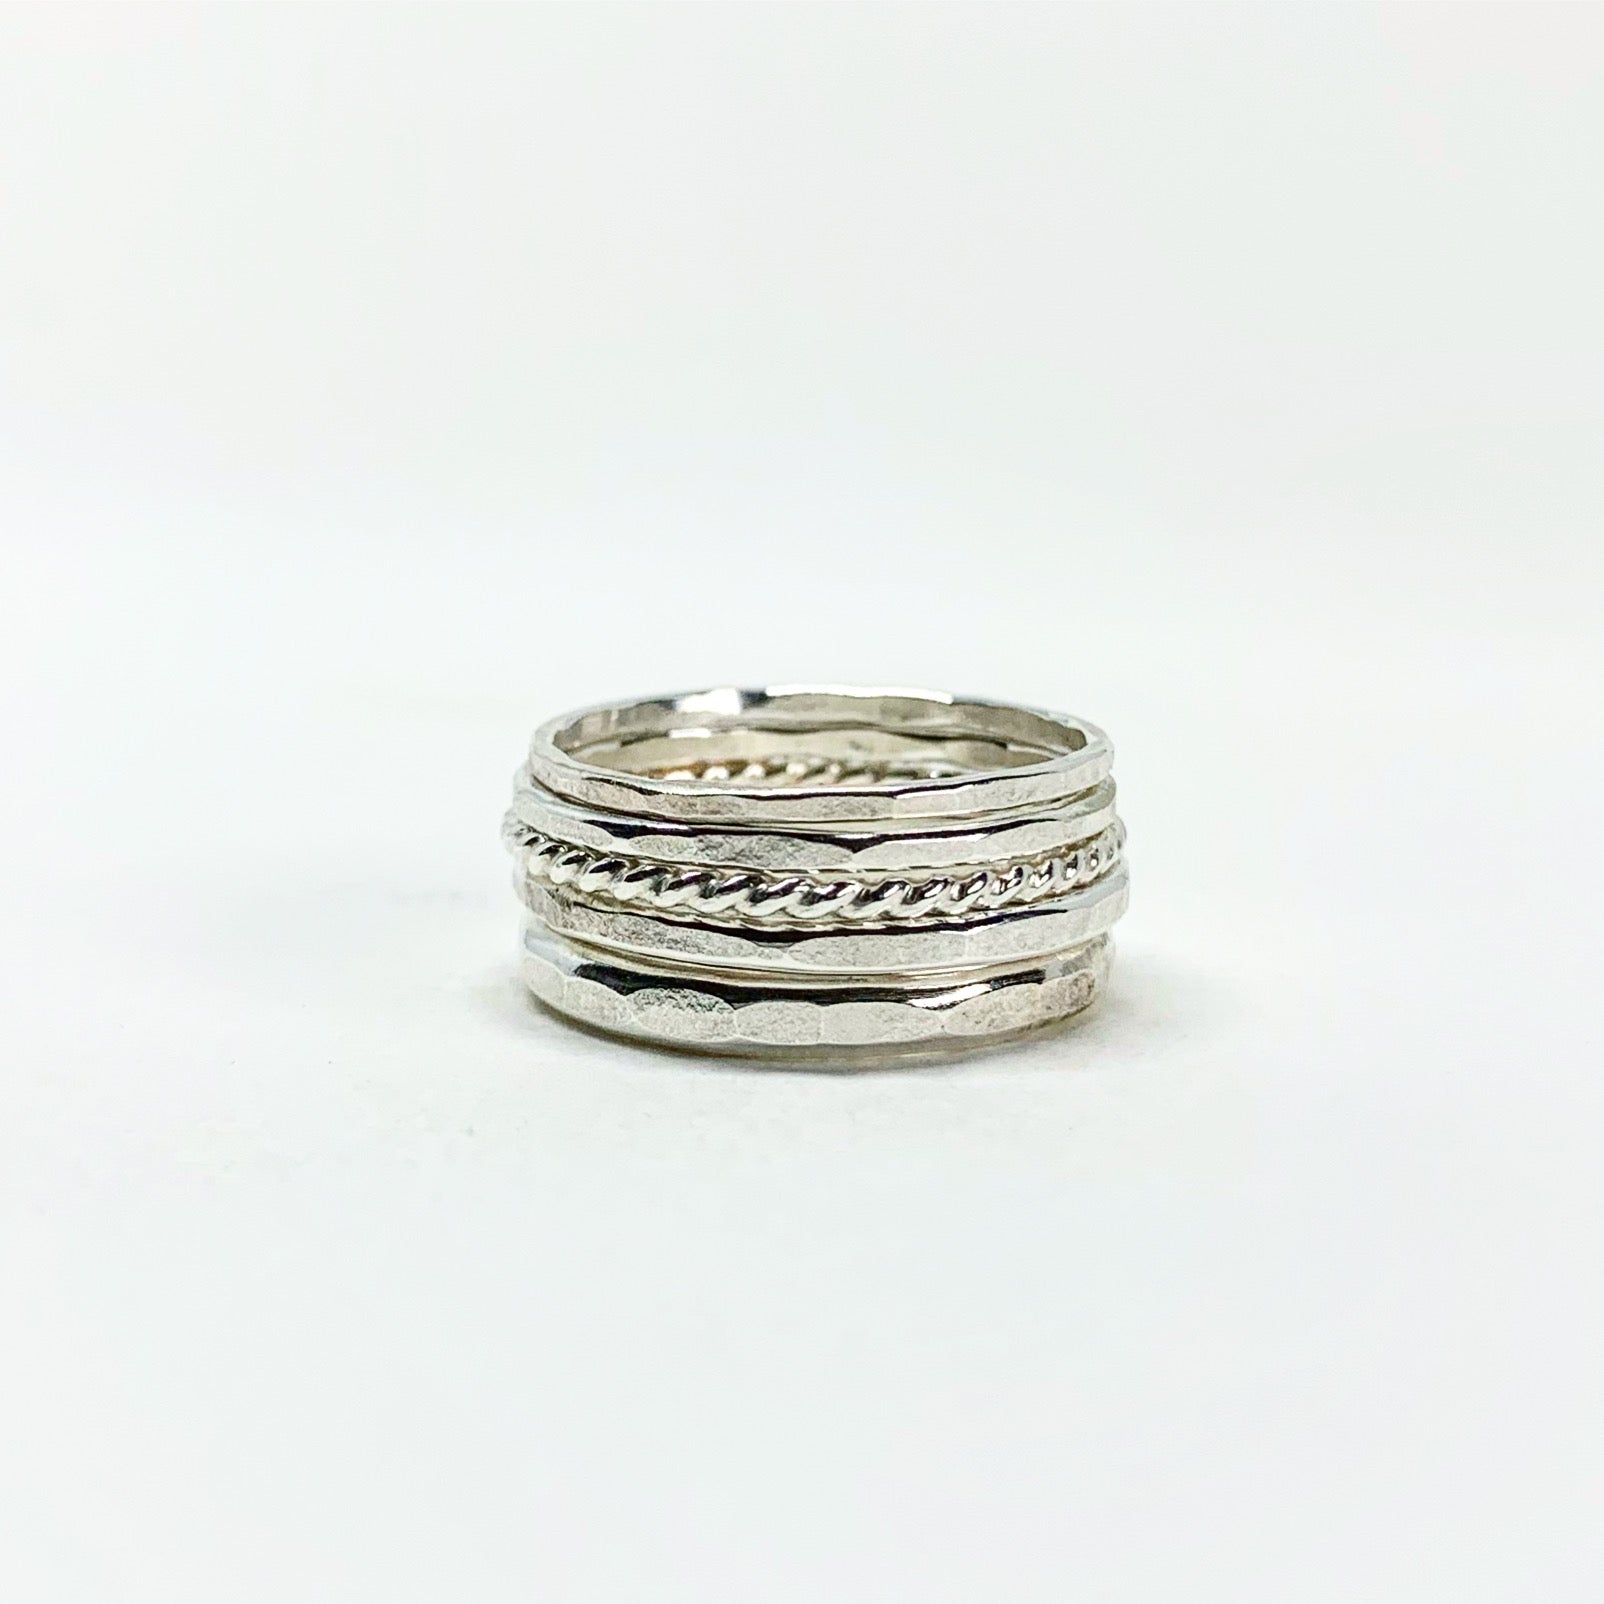 Bridal Stacking Ring Set - KME means the very best